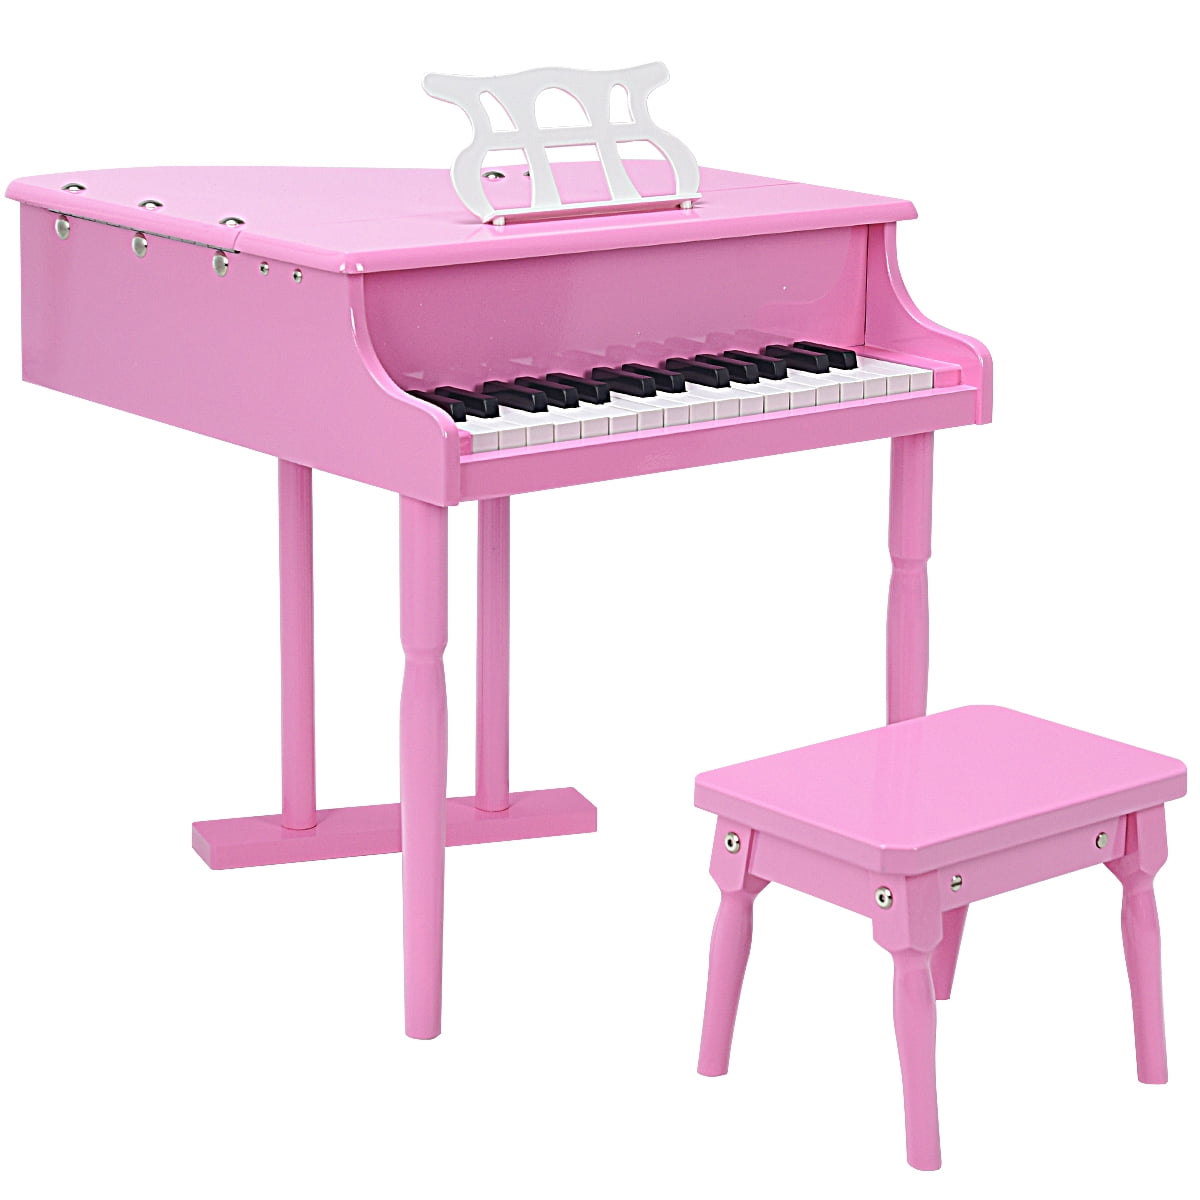 NEW CHILD'S PIANO BABY GRAND KIDS W/ BENCH TOY PINK 